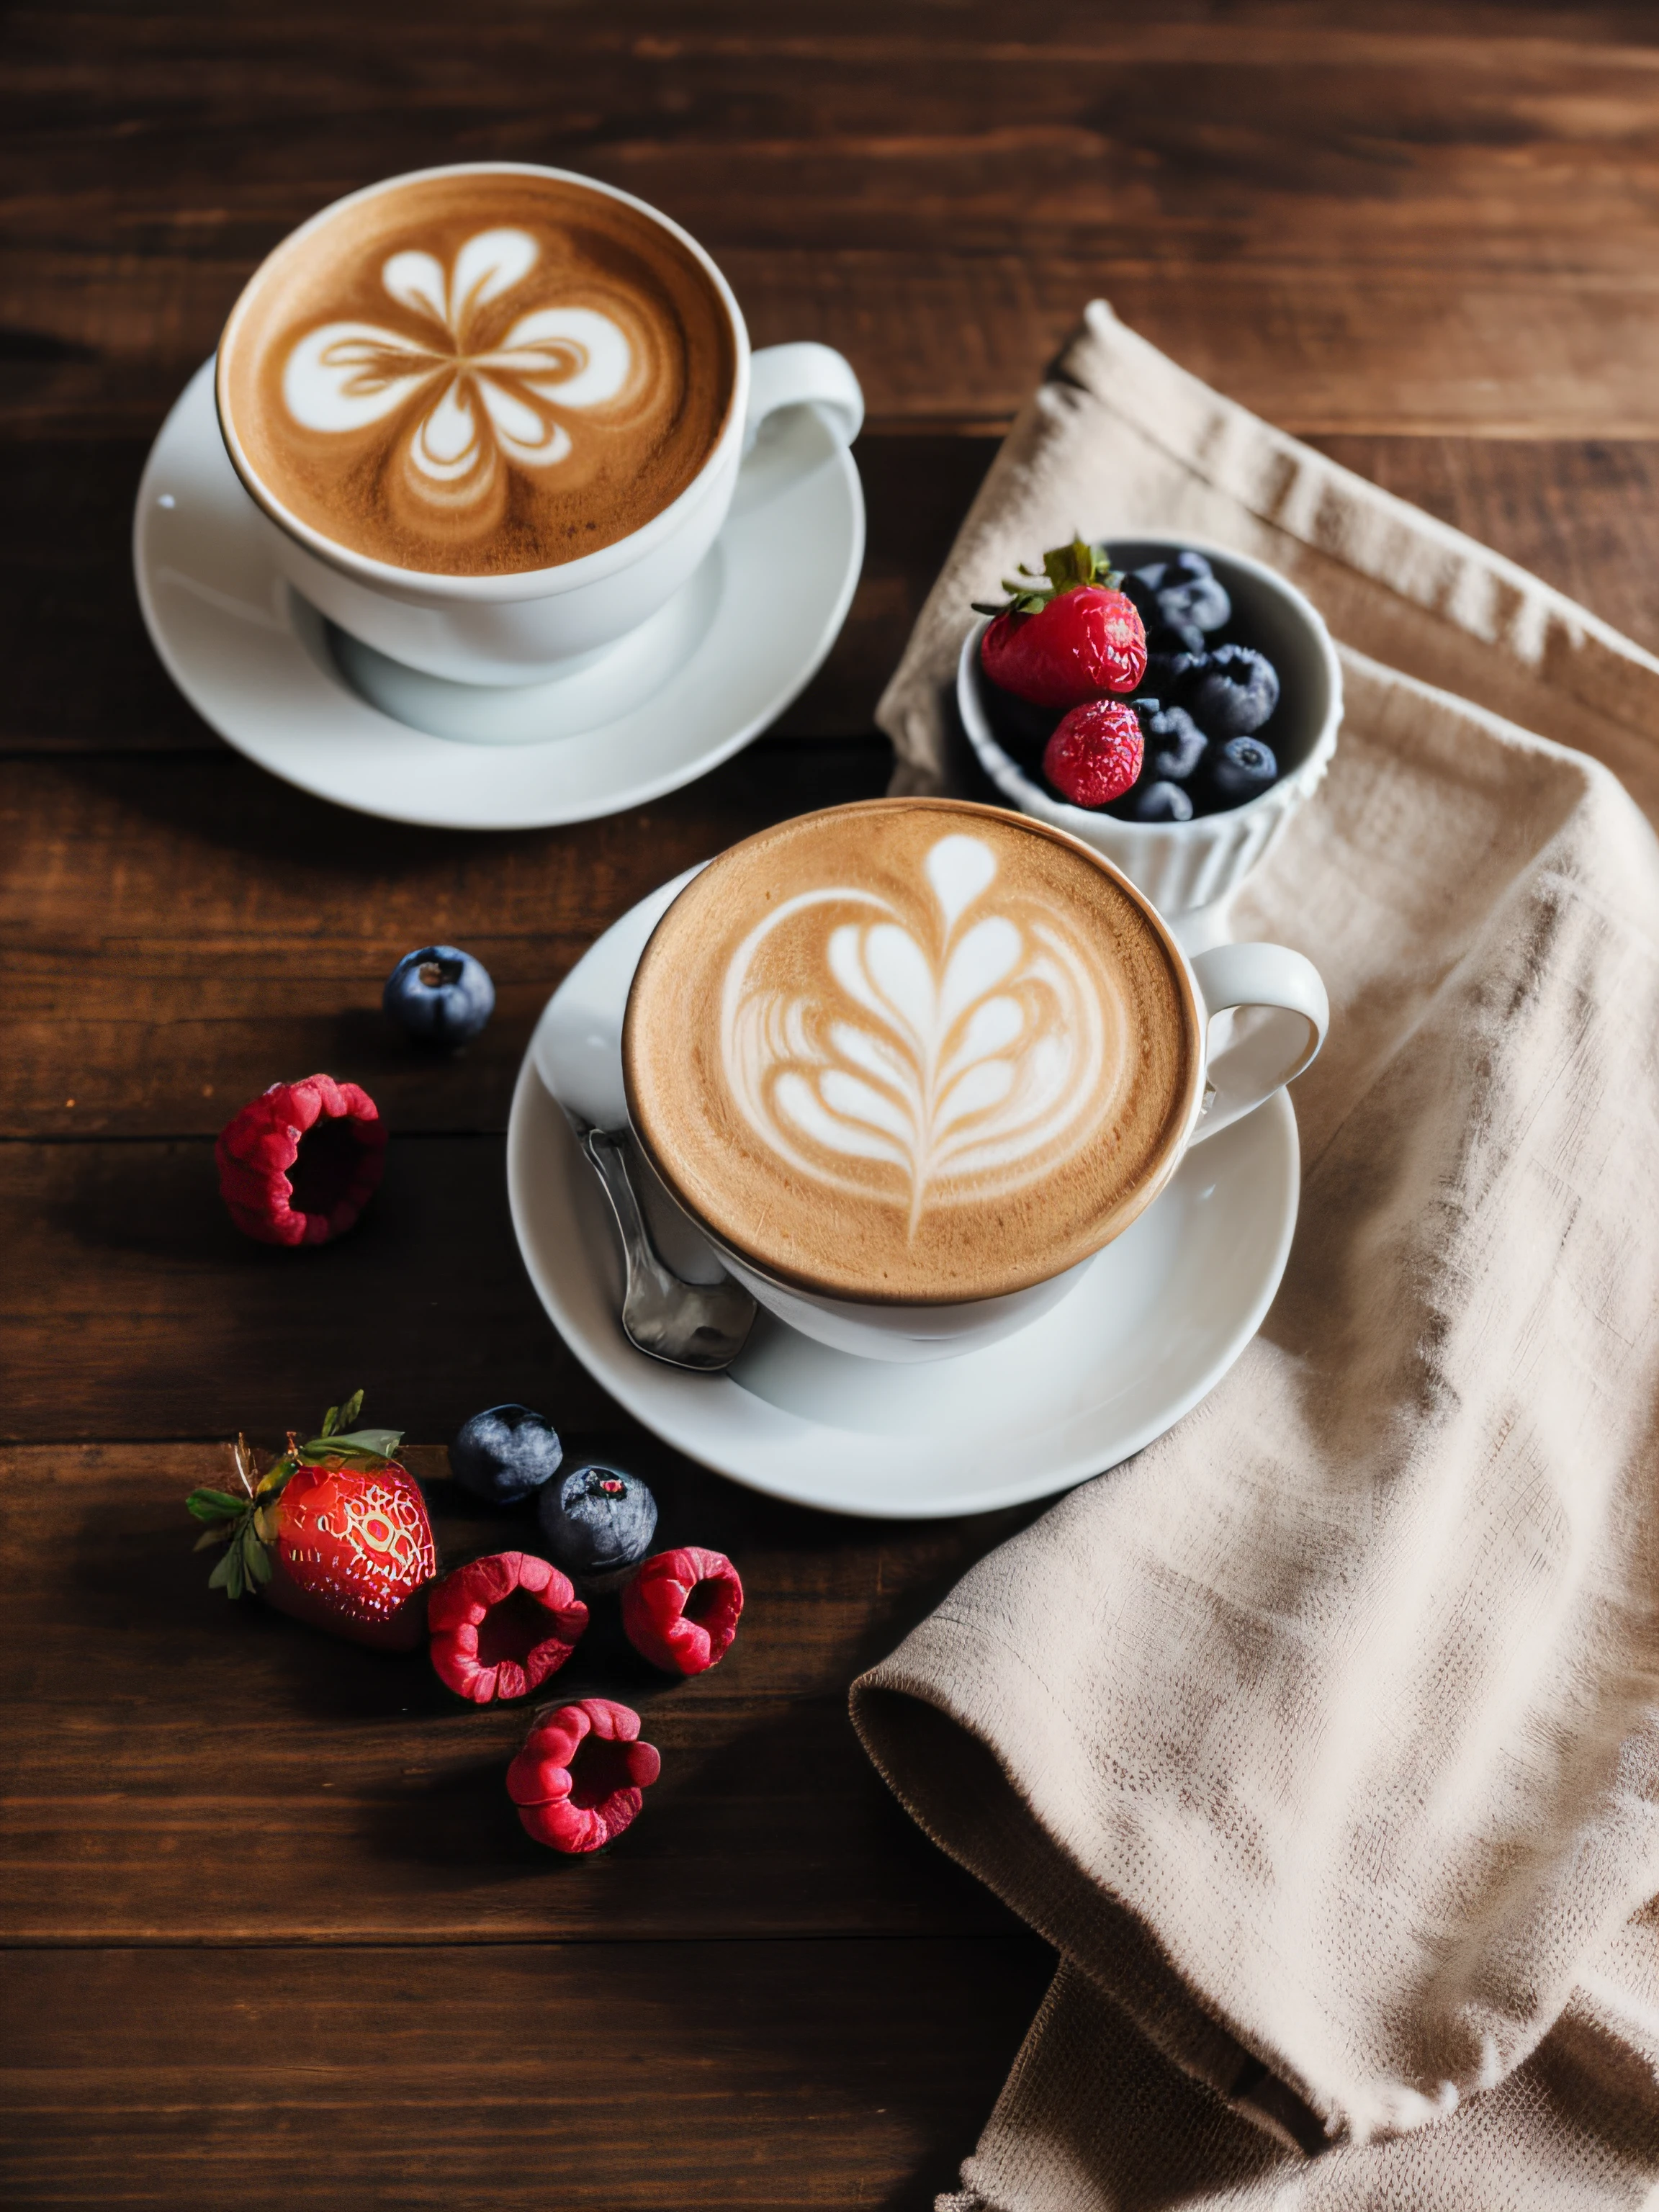 (masterpiece,best quality,highres,ultra_detailed:1.2),
simple background, still life, flowers,rule of thirds,
coffee,dessert,cream,berries,cloth